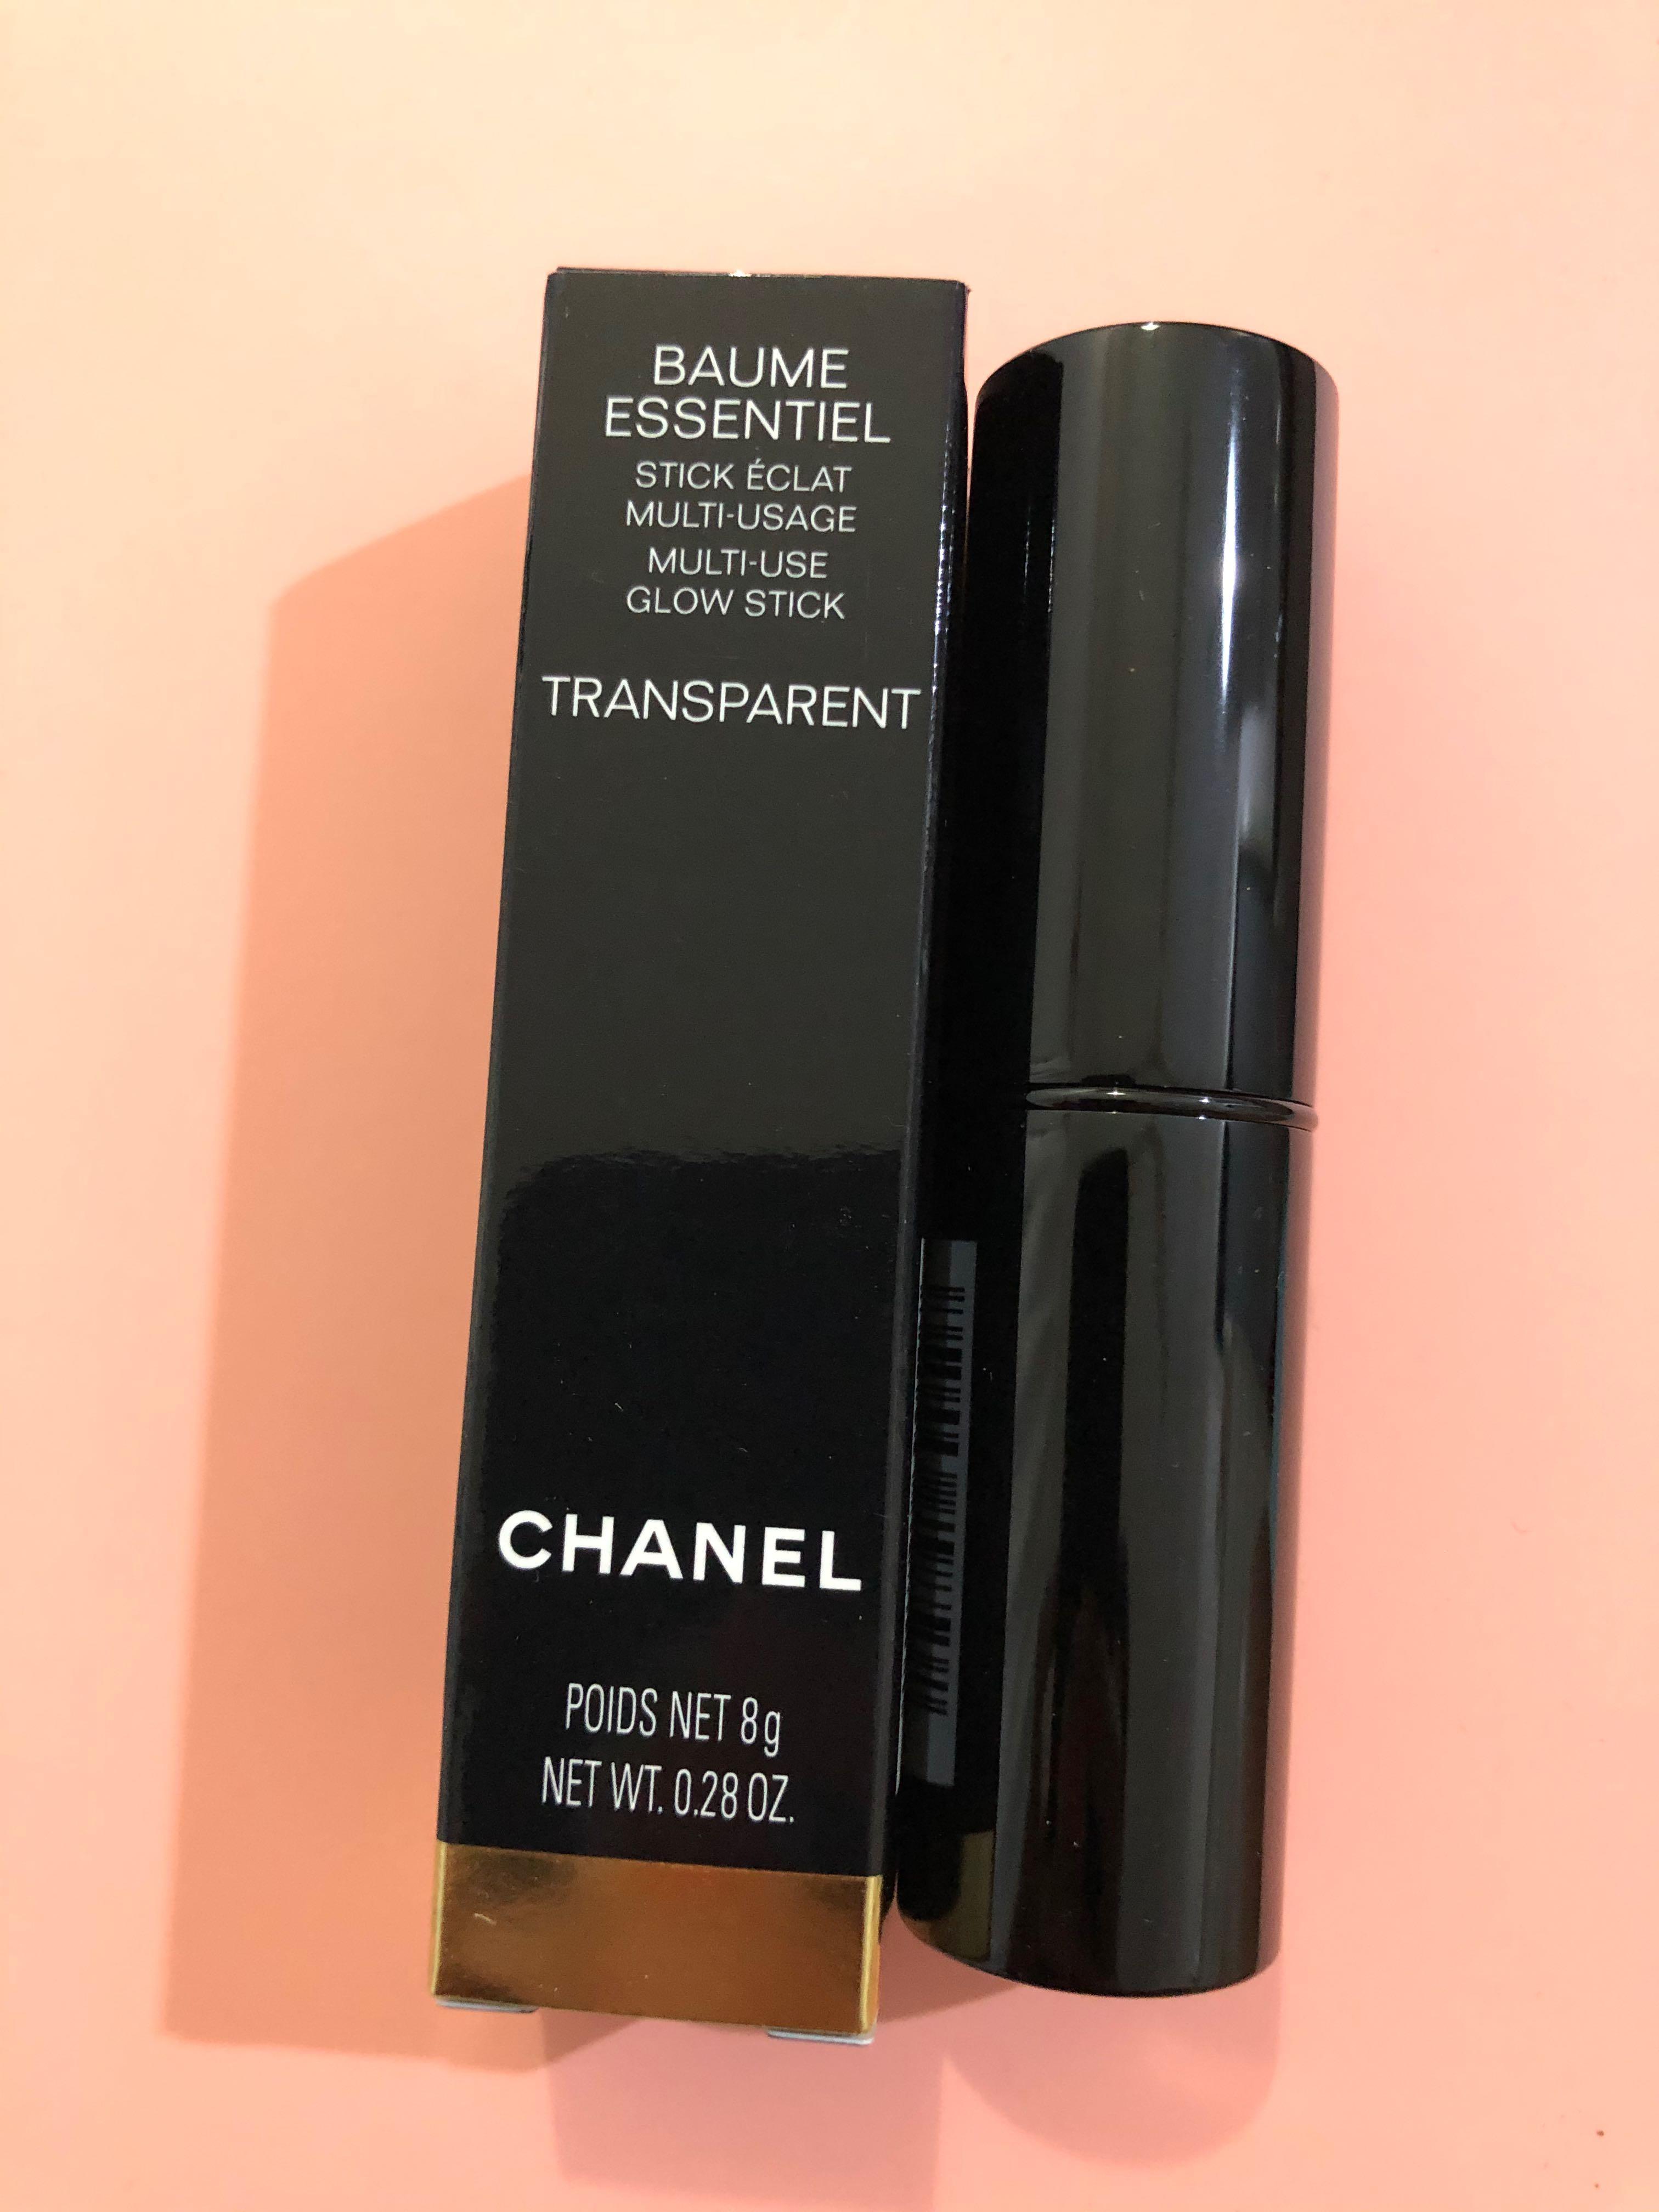 ▫❡Chanel Baume Essential Multi-Use Glow Stick 8g